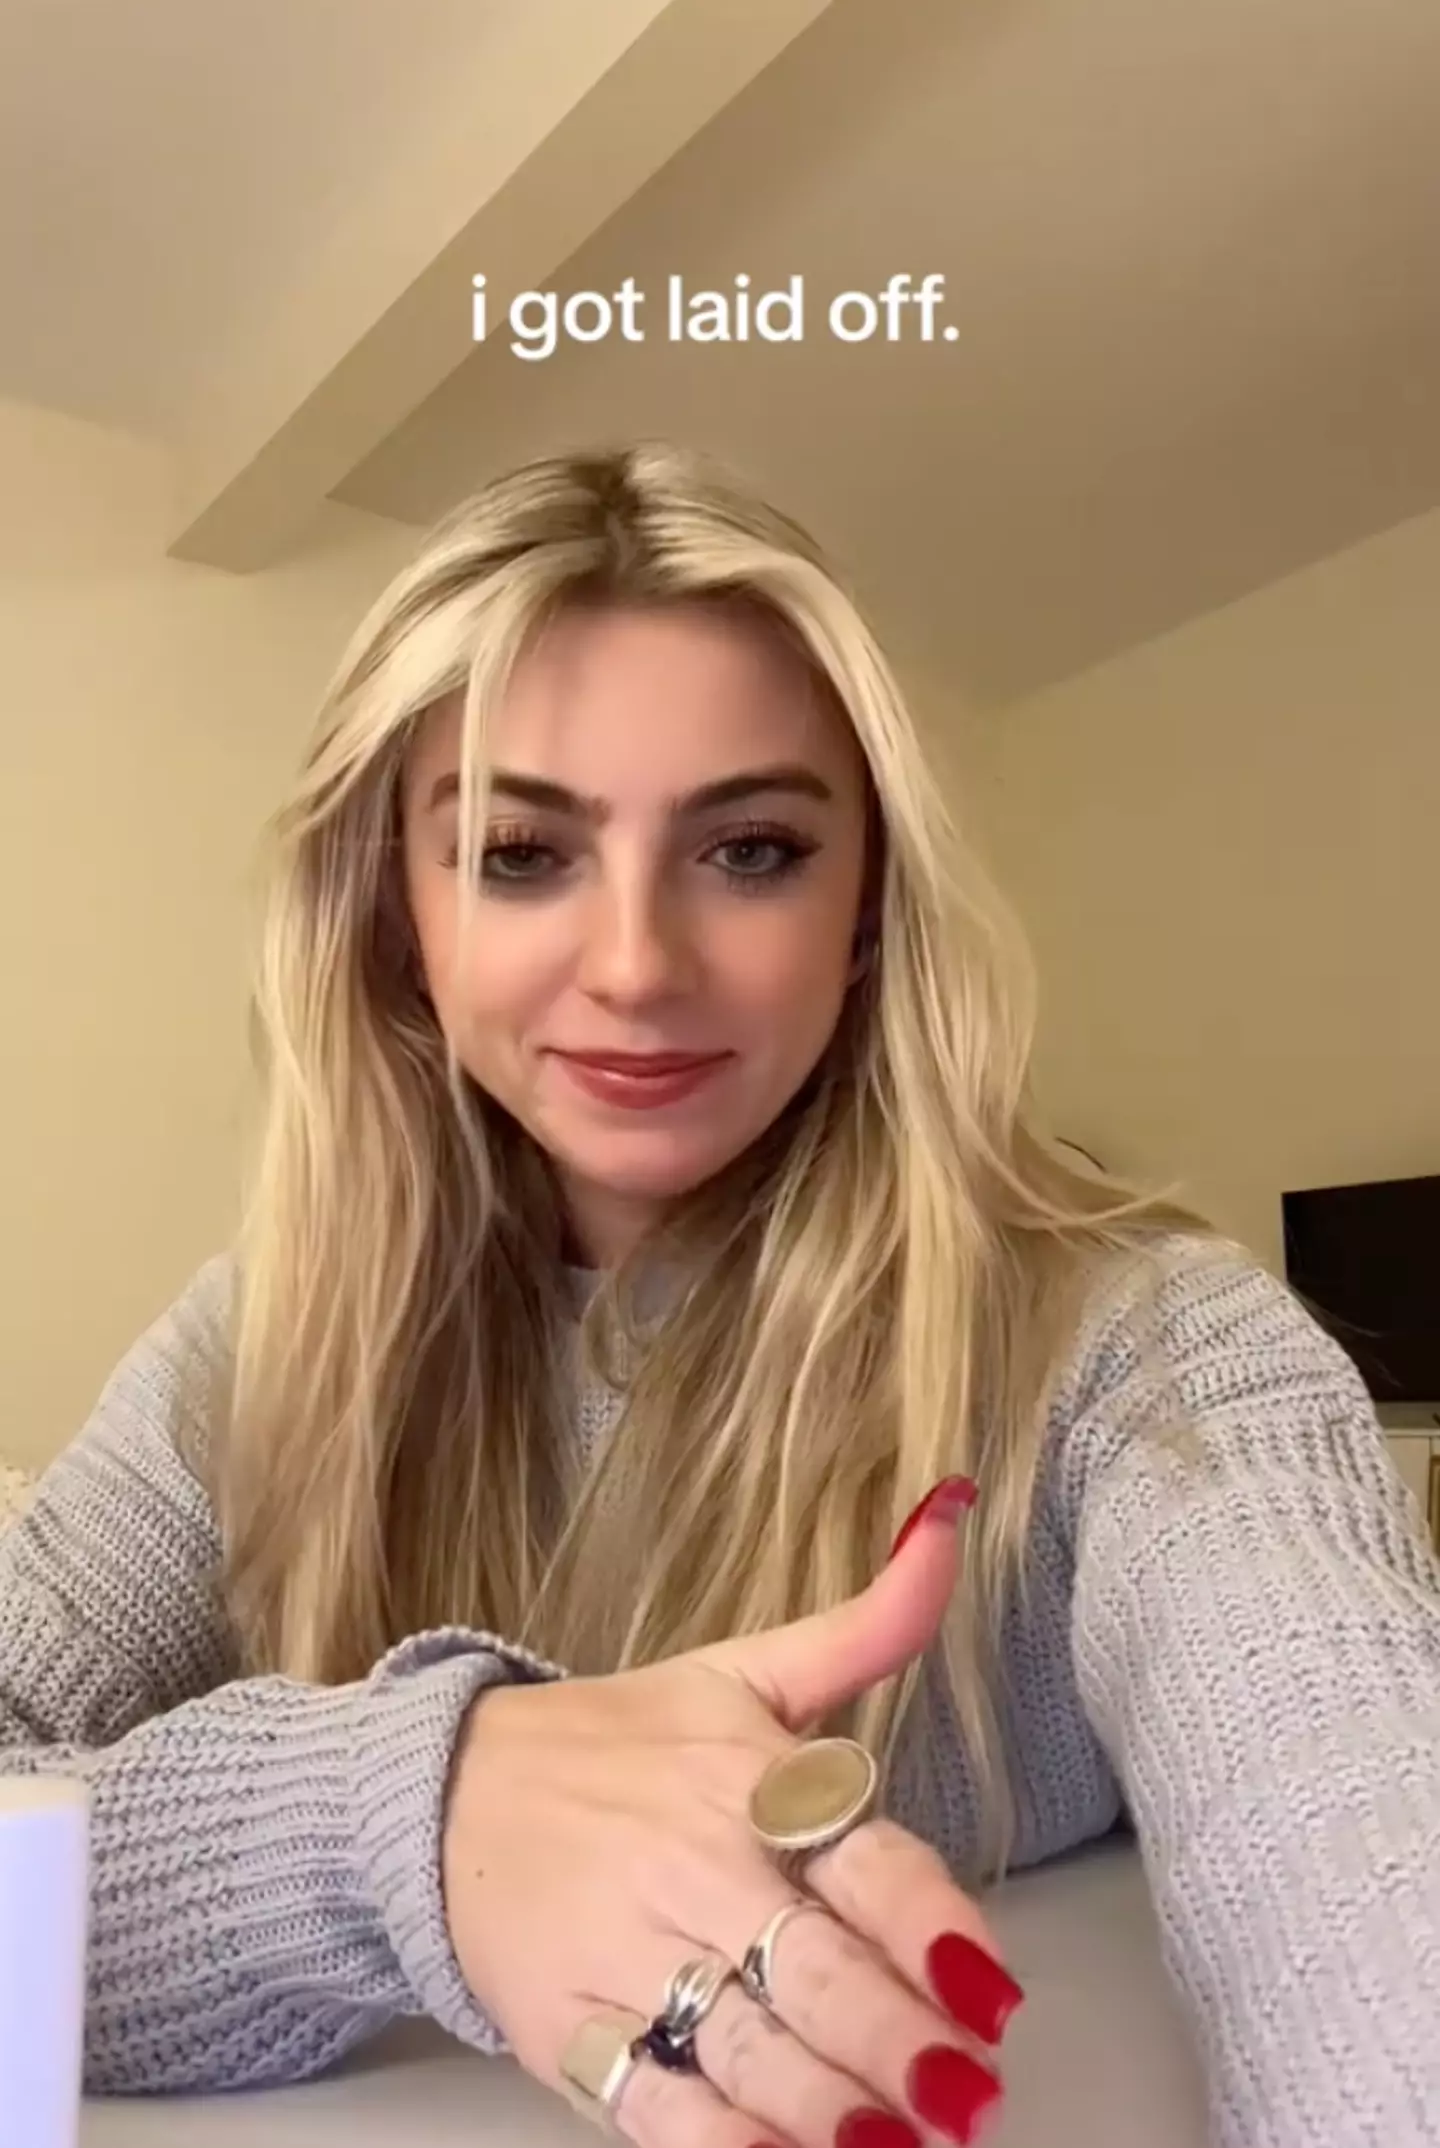 Brielle unfortunately got laid off just before the holidays.